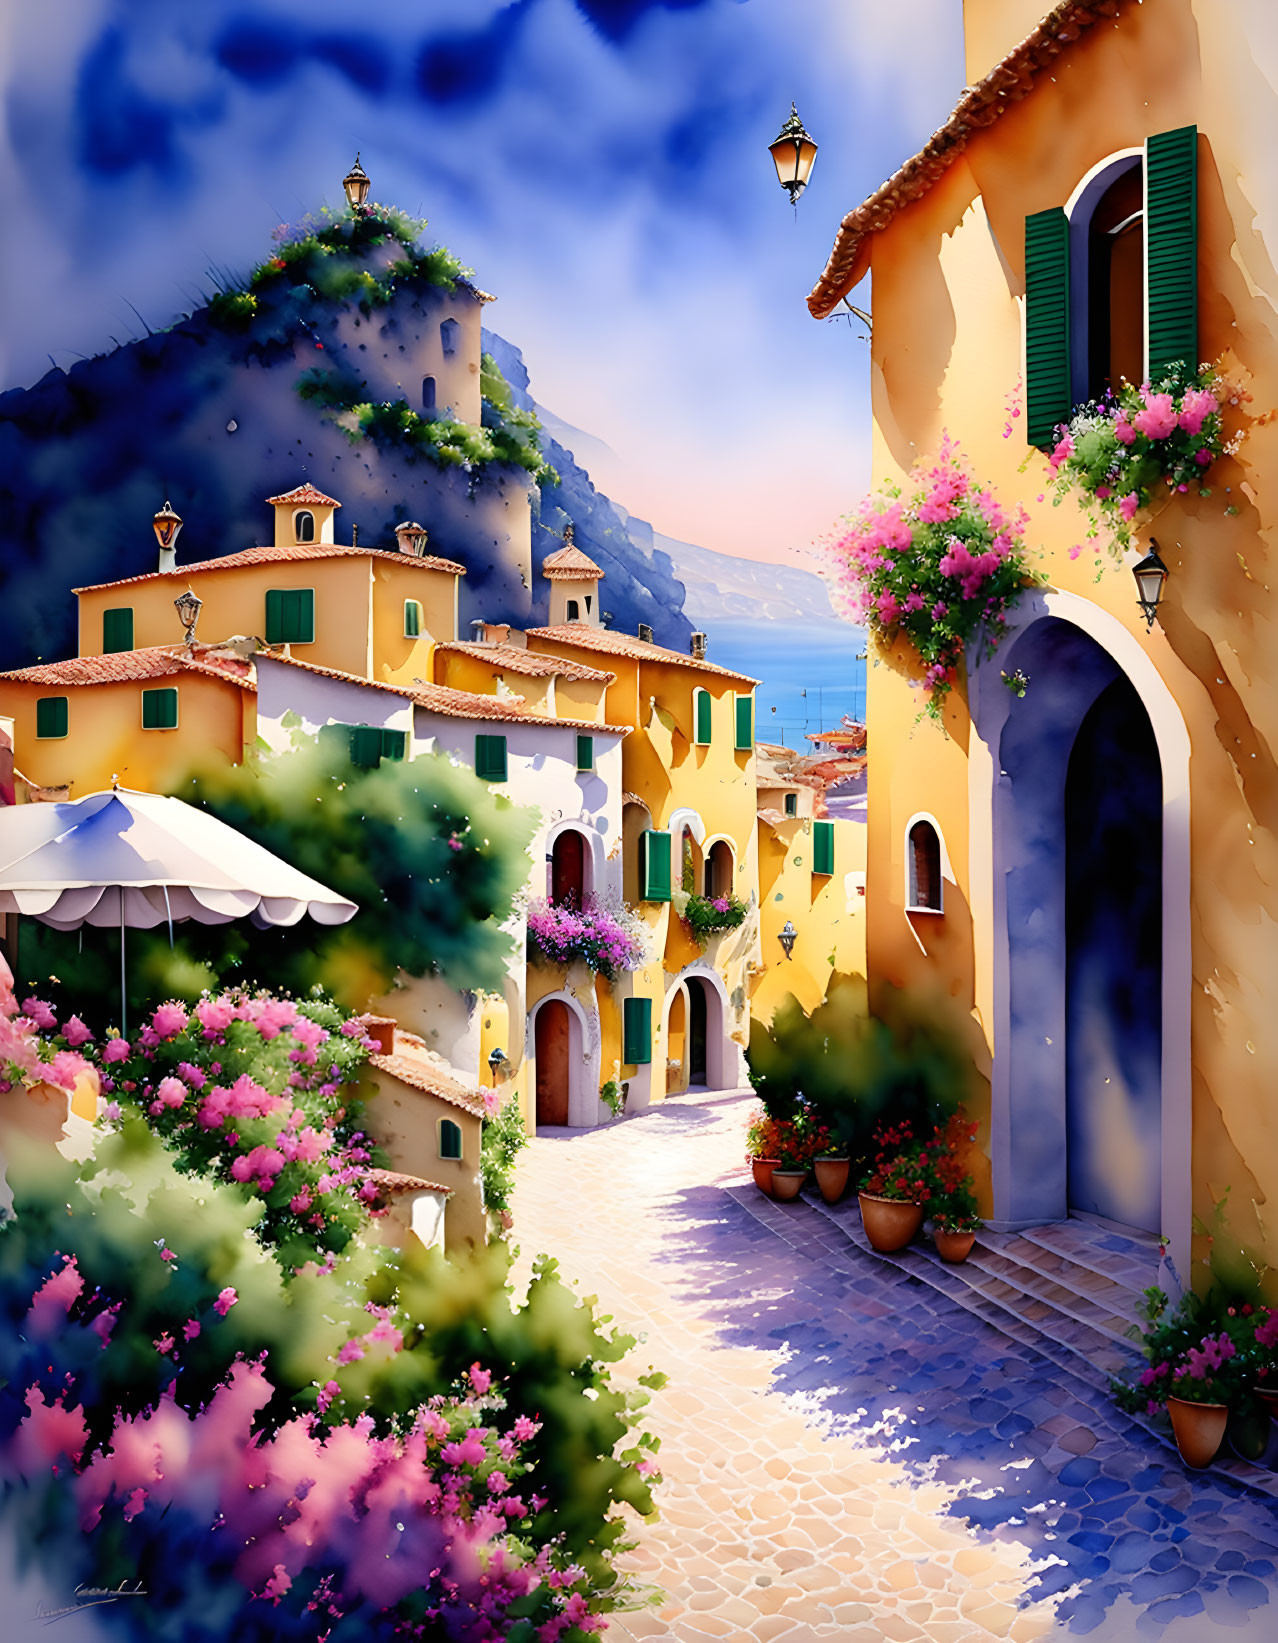 Colorful Coastal Village Painting with Cobblestone Street & Sea View